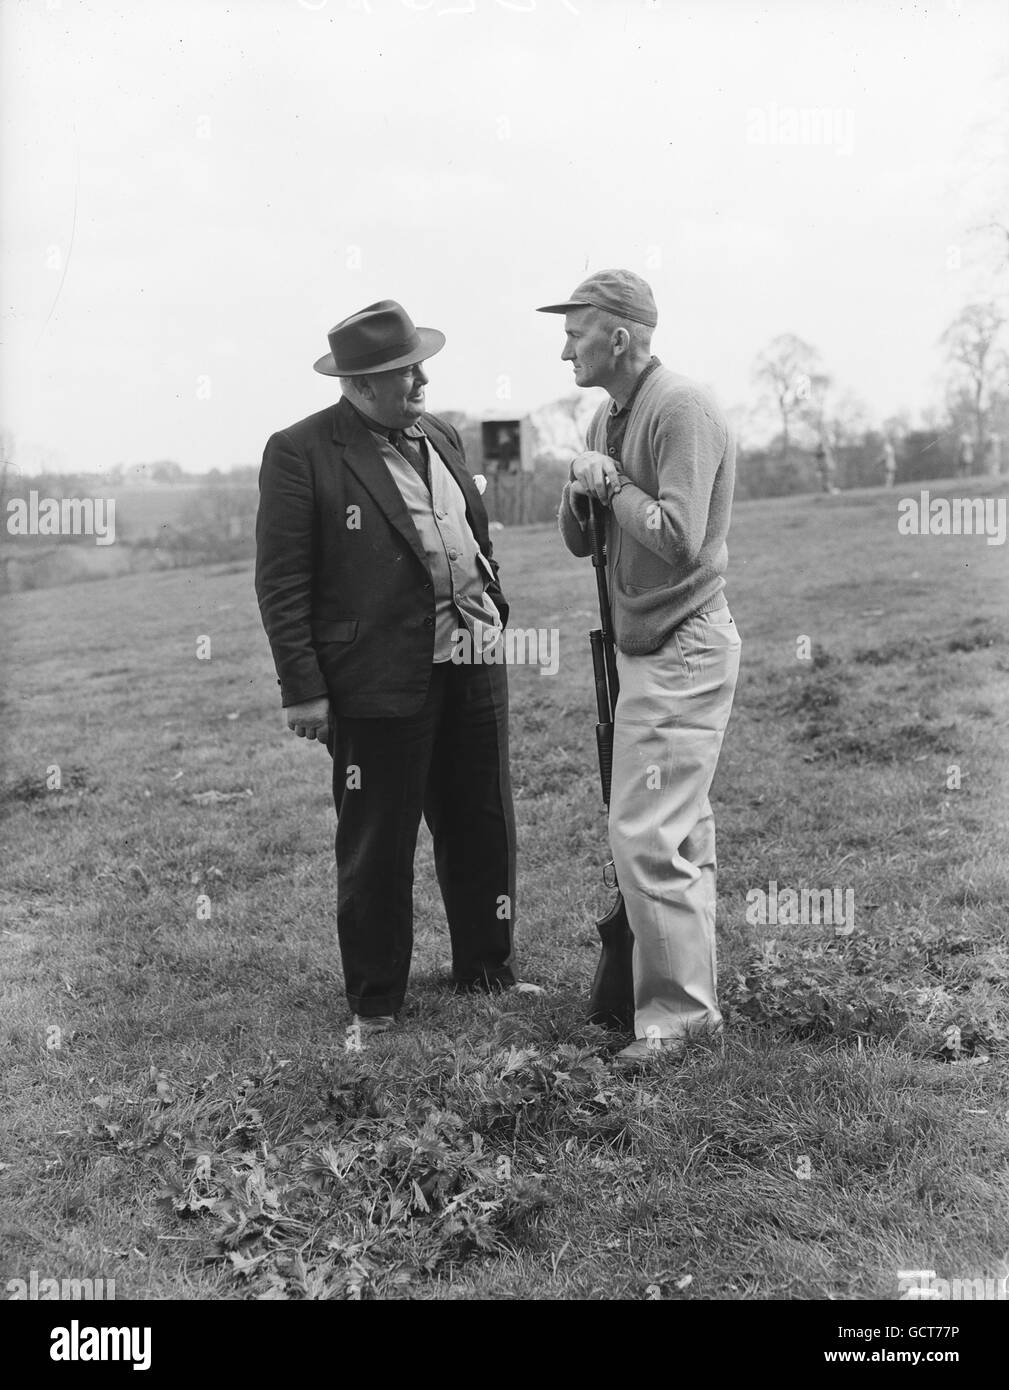 Shooting - Annual Open and Gamekeepers Clay Pigeon Shoot - Ditchley Park - Charlbury. Ernest Cross (left) an Oxford dairyman and Master Sgt Thomas of RAF Brize Norton. Stock Photo